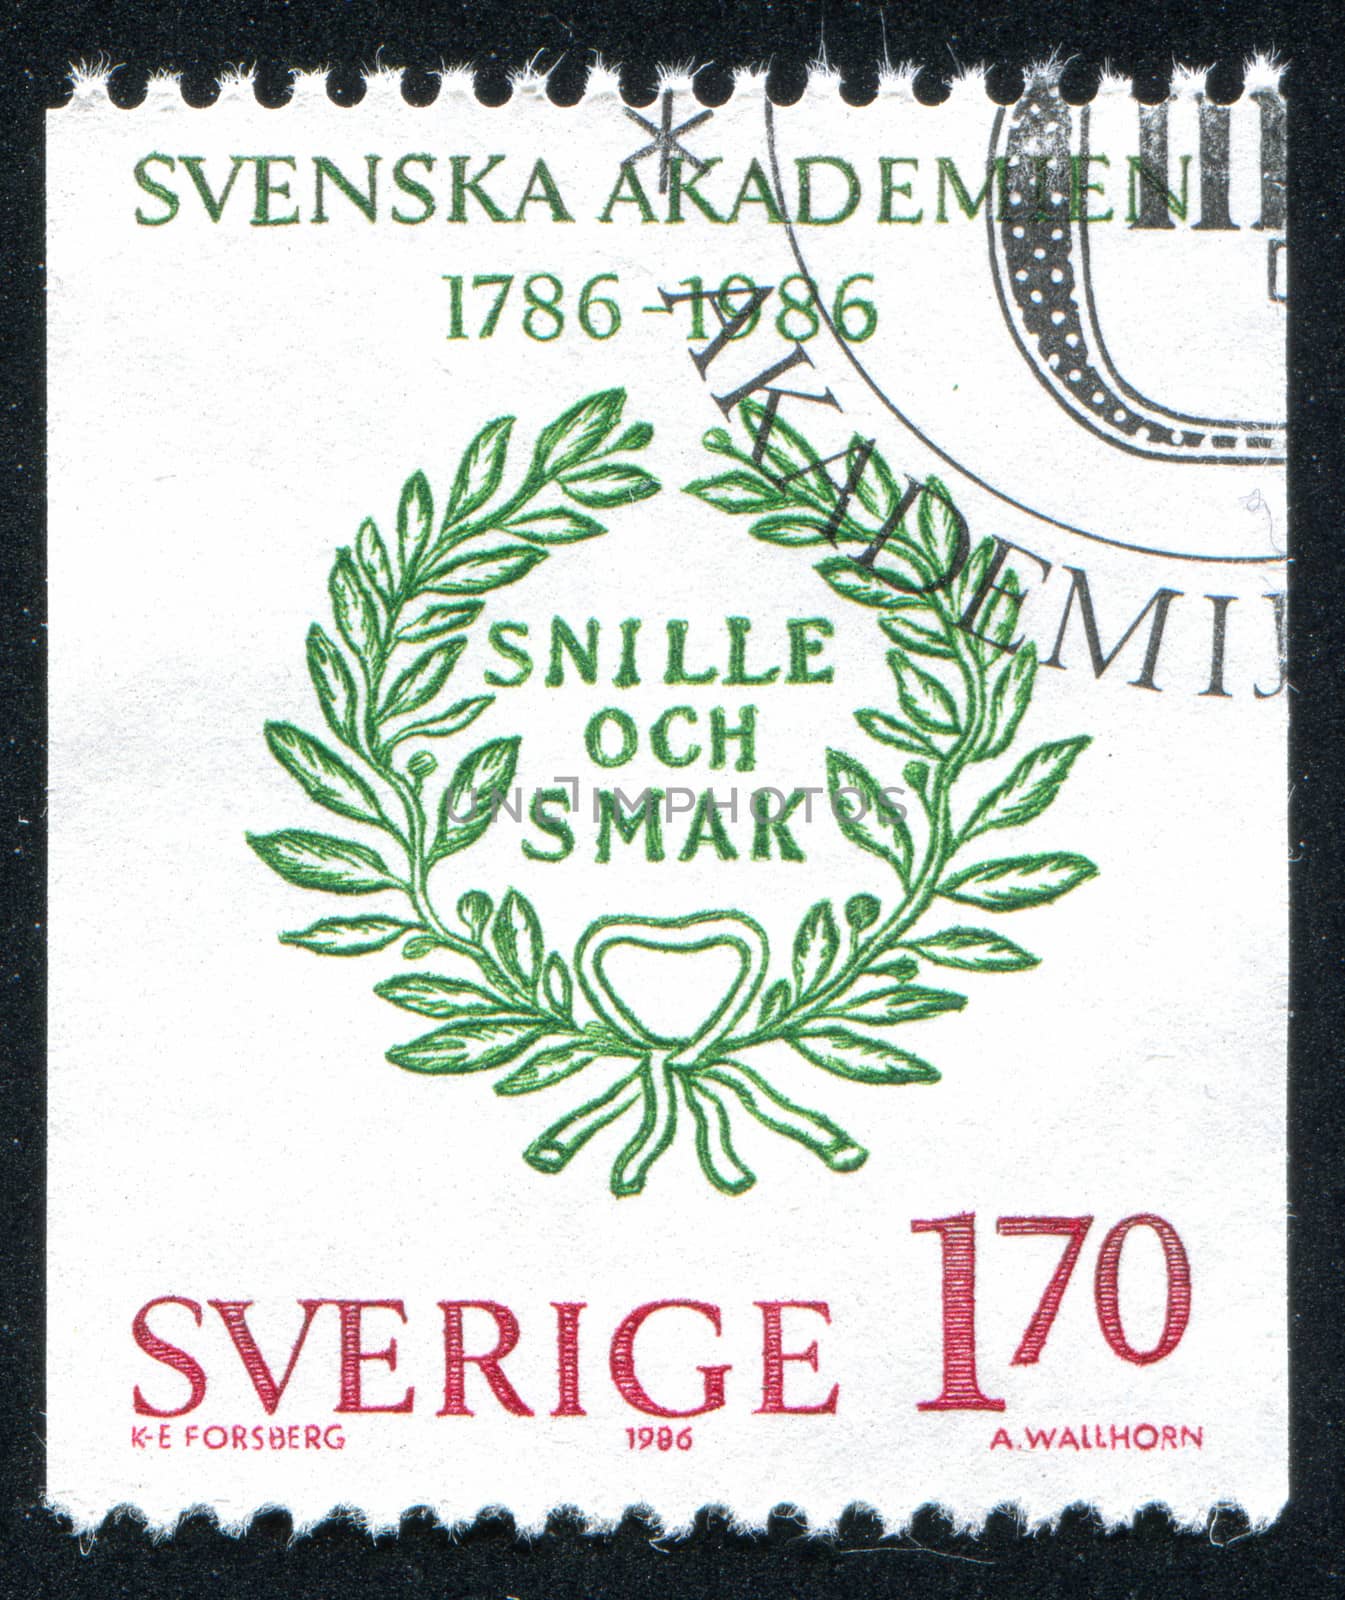 Motto of the Swedish Academy by rook